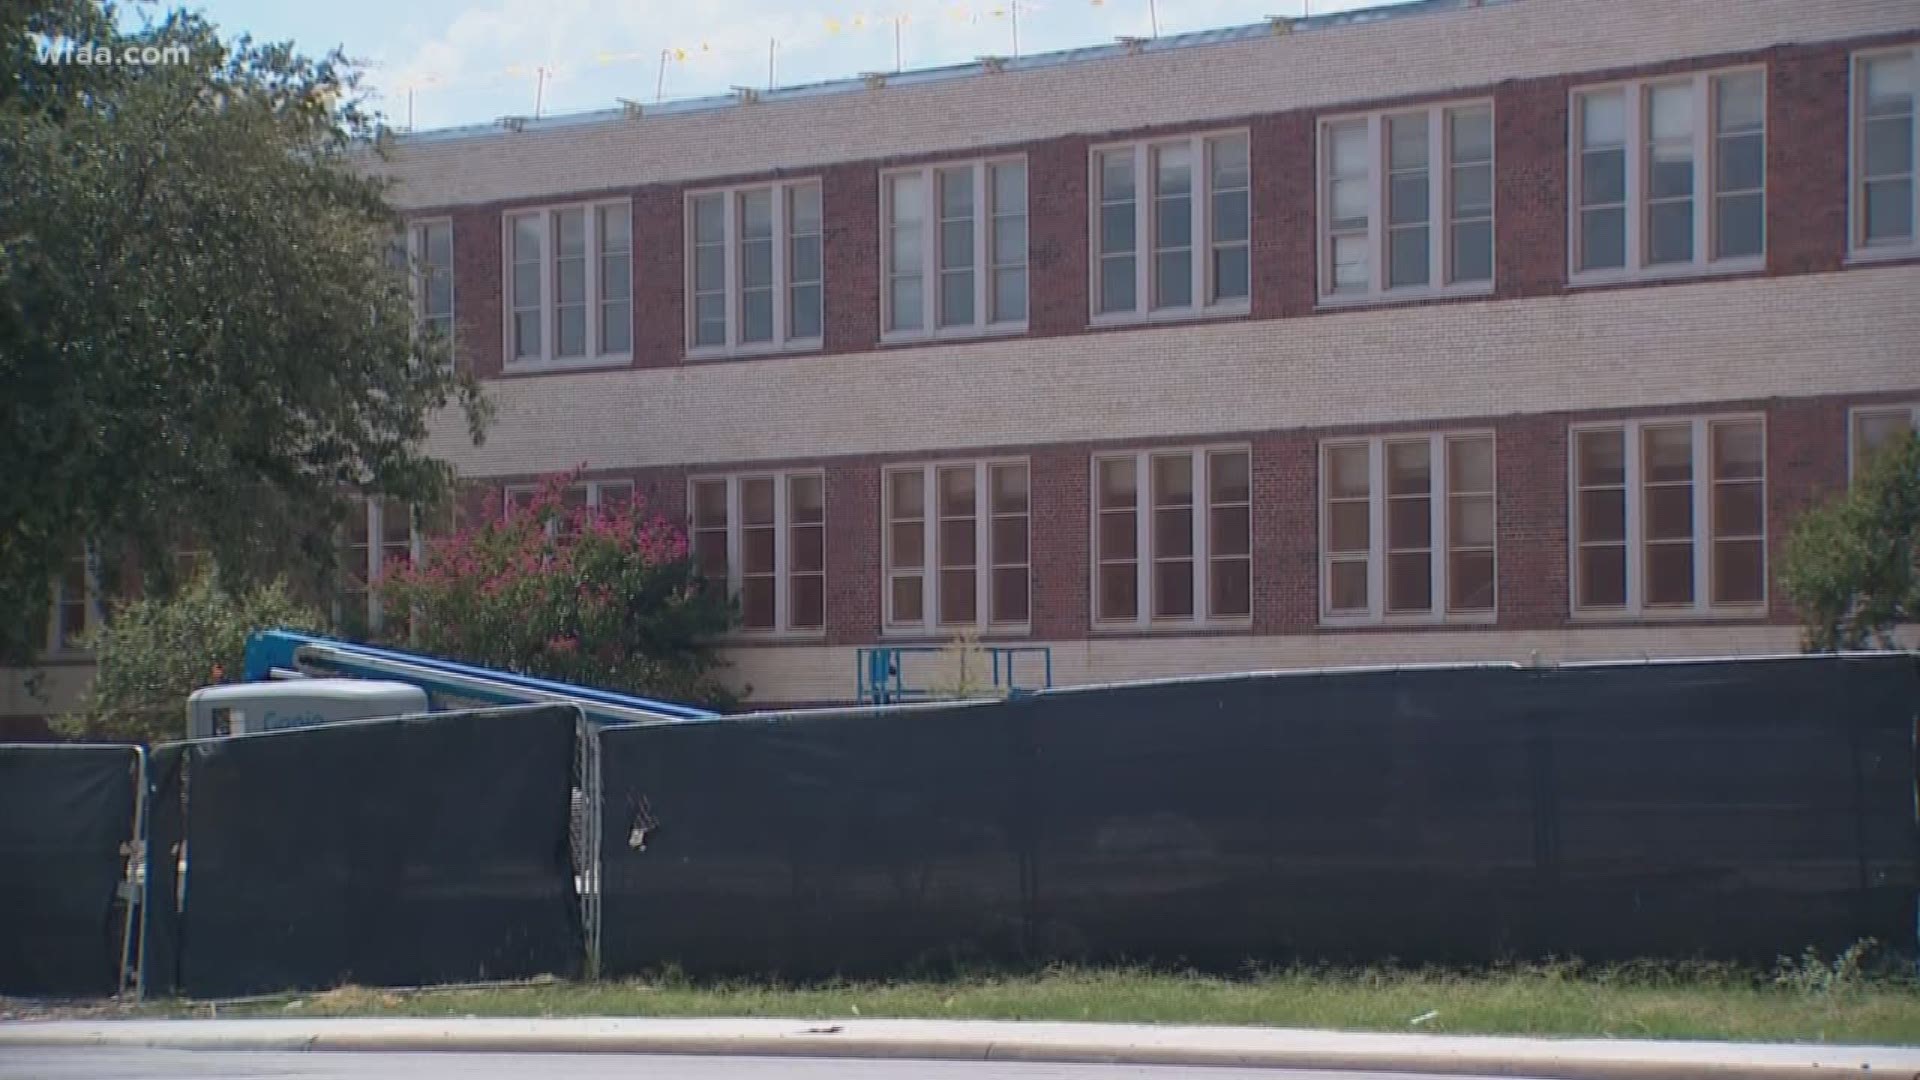 For years students and parents have been complaining about the conditions at South Oak Cliff High School. It’s the local school for some of the most disadvantaged neighborhoods in Dallas. While renovations are underway, someone are worried the students will end up getting the short end of the stick.